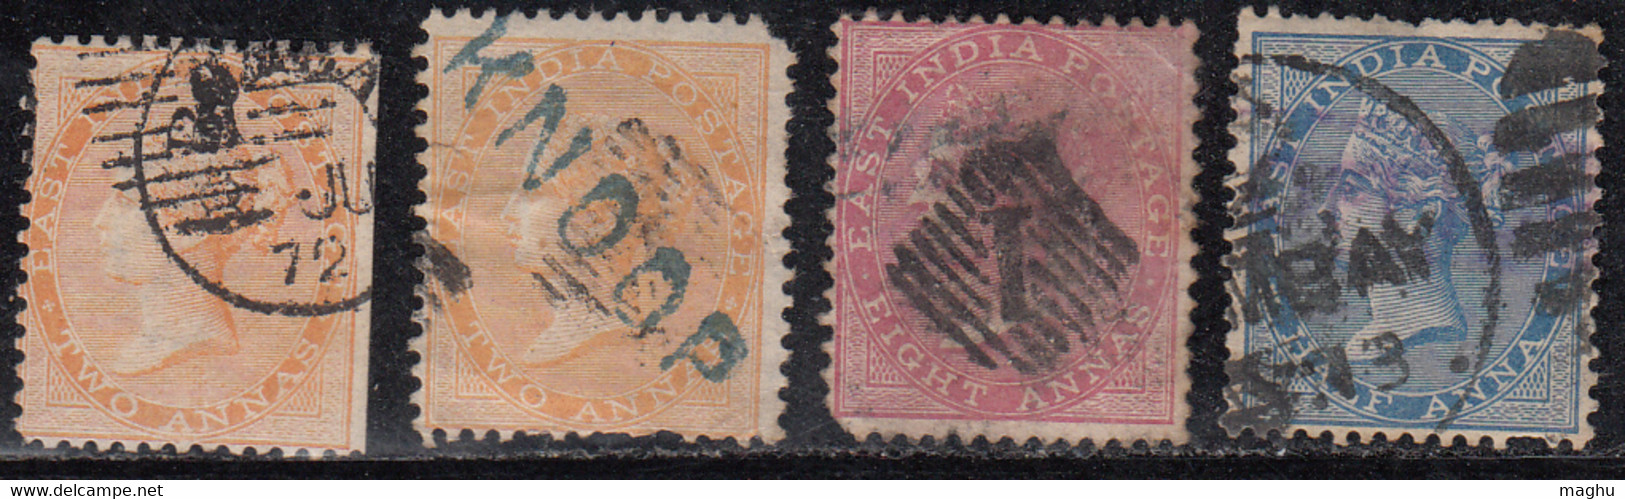 4 Diff., BOMBAY Cancellation, JC Tpye 4 And Local Varities On QV British East India Used, (stamps Damaged) - 1854 Compañia Británica De Las Indias